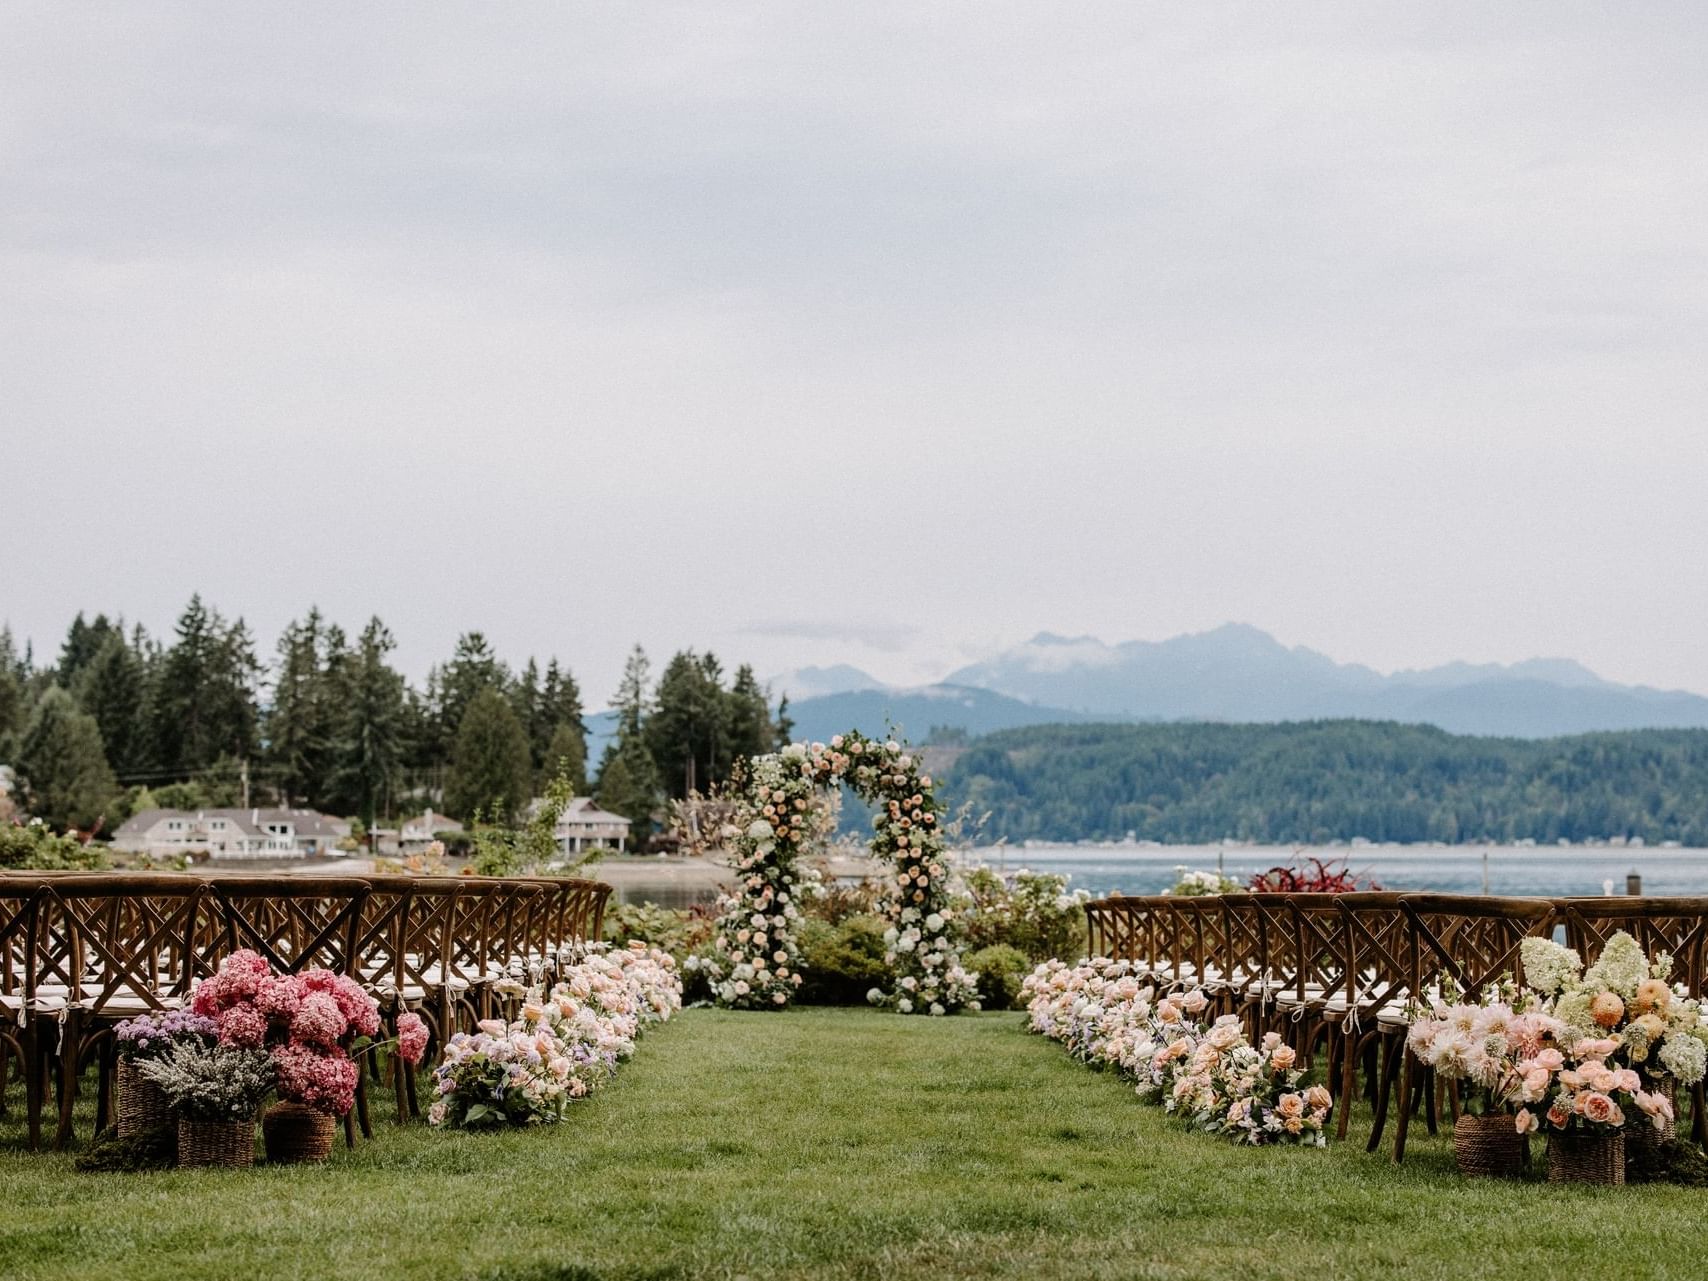 Wedding arrangements with floral decor in Waterfront Lawn at Alderbrook Resort & Spa